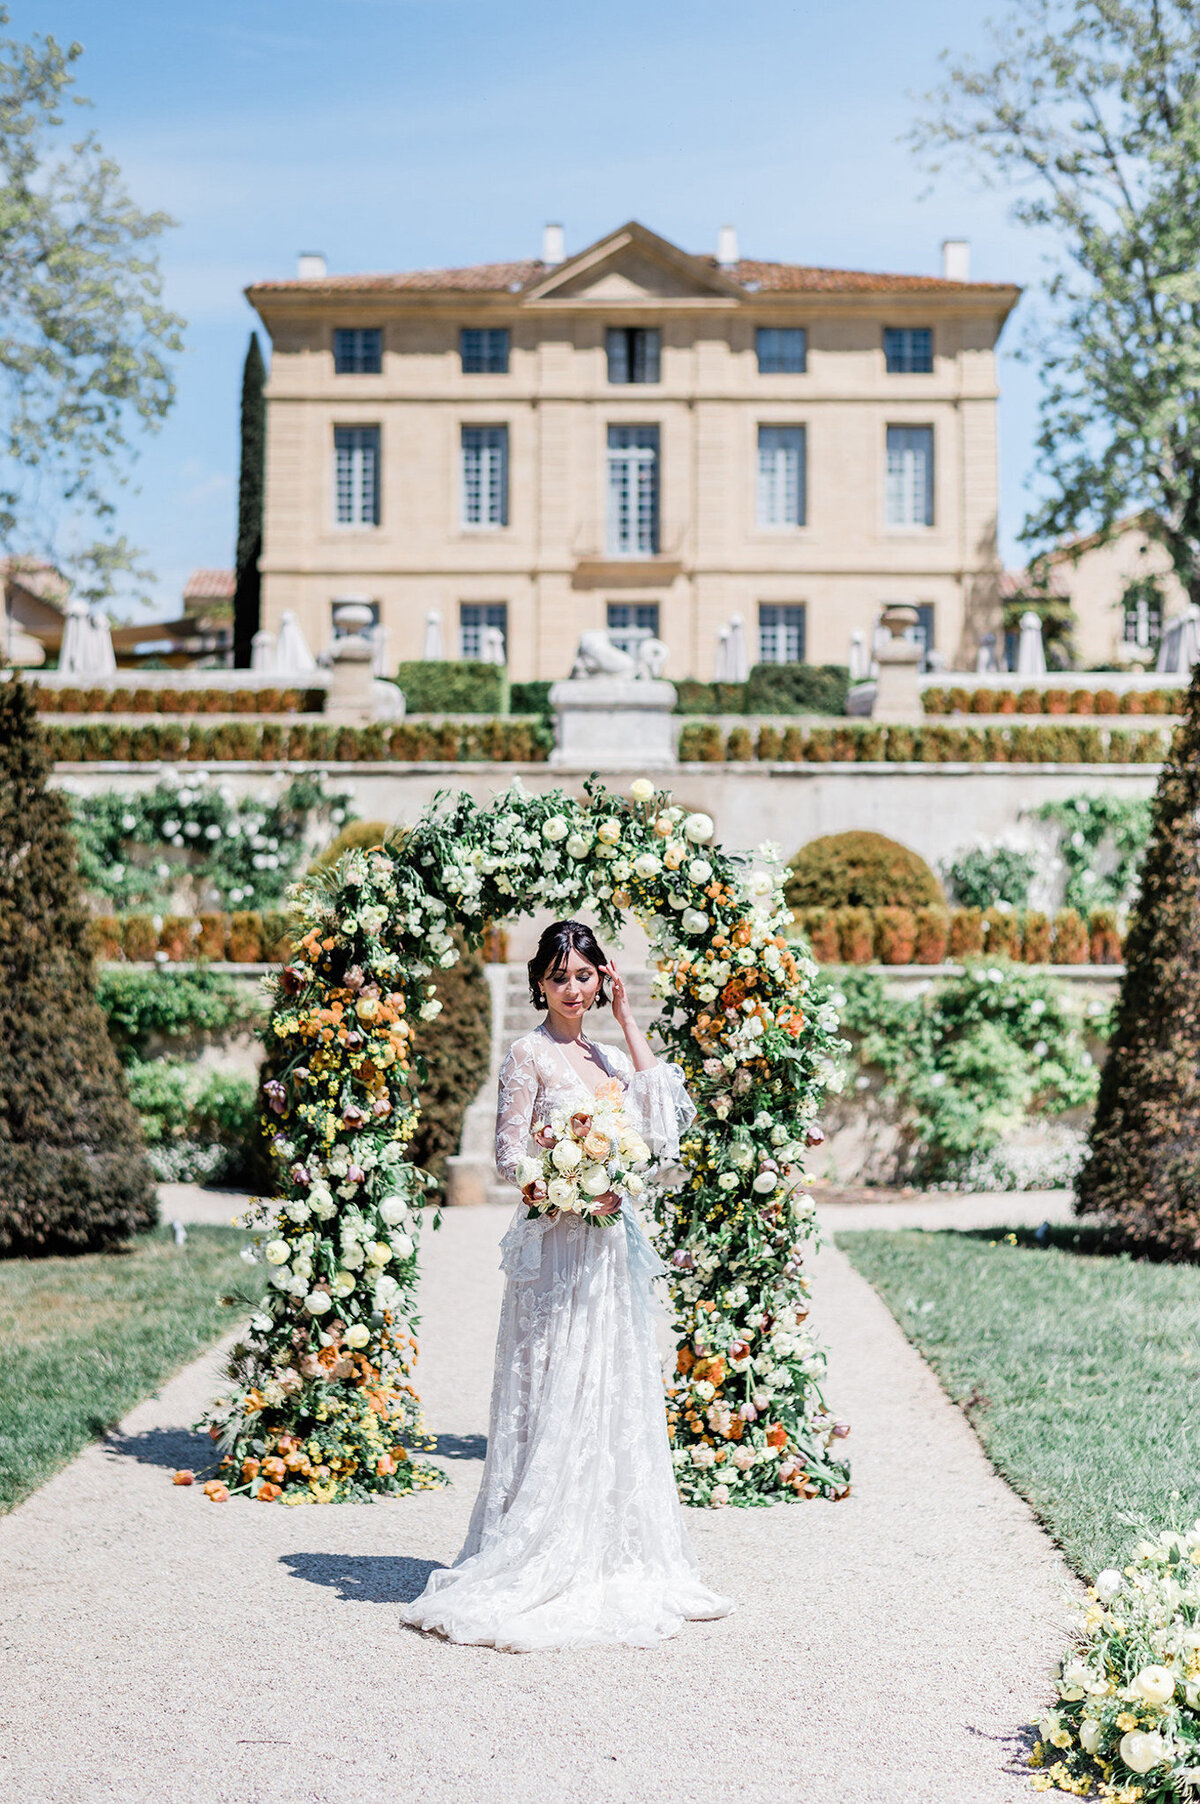 Cherish the intimate moments of your wedding celebration in France with our luxury services. Our fine art lens transforms your journey into a visual story, capturing the delicate details and emotions that define your connection.